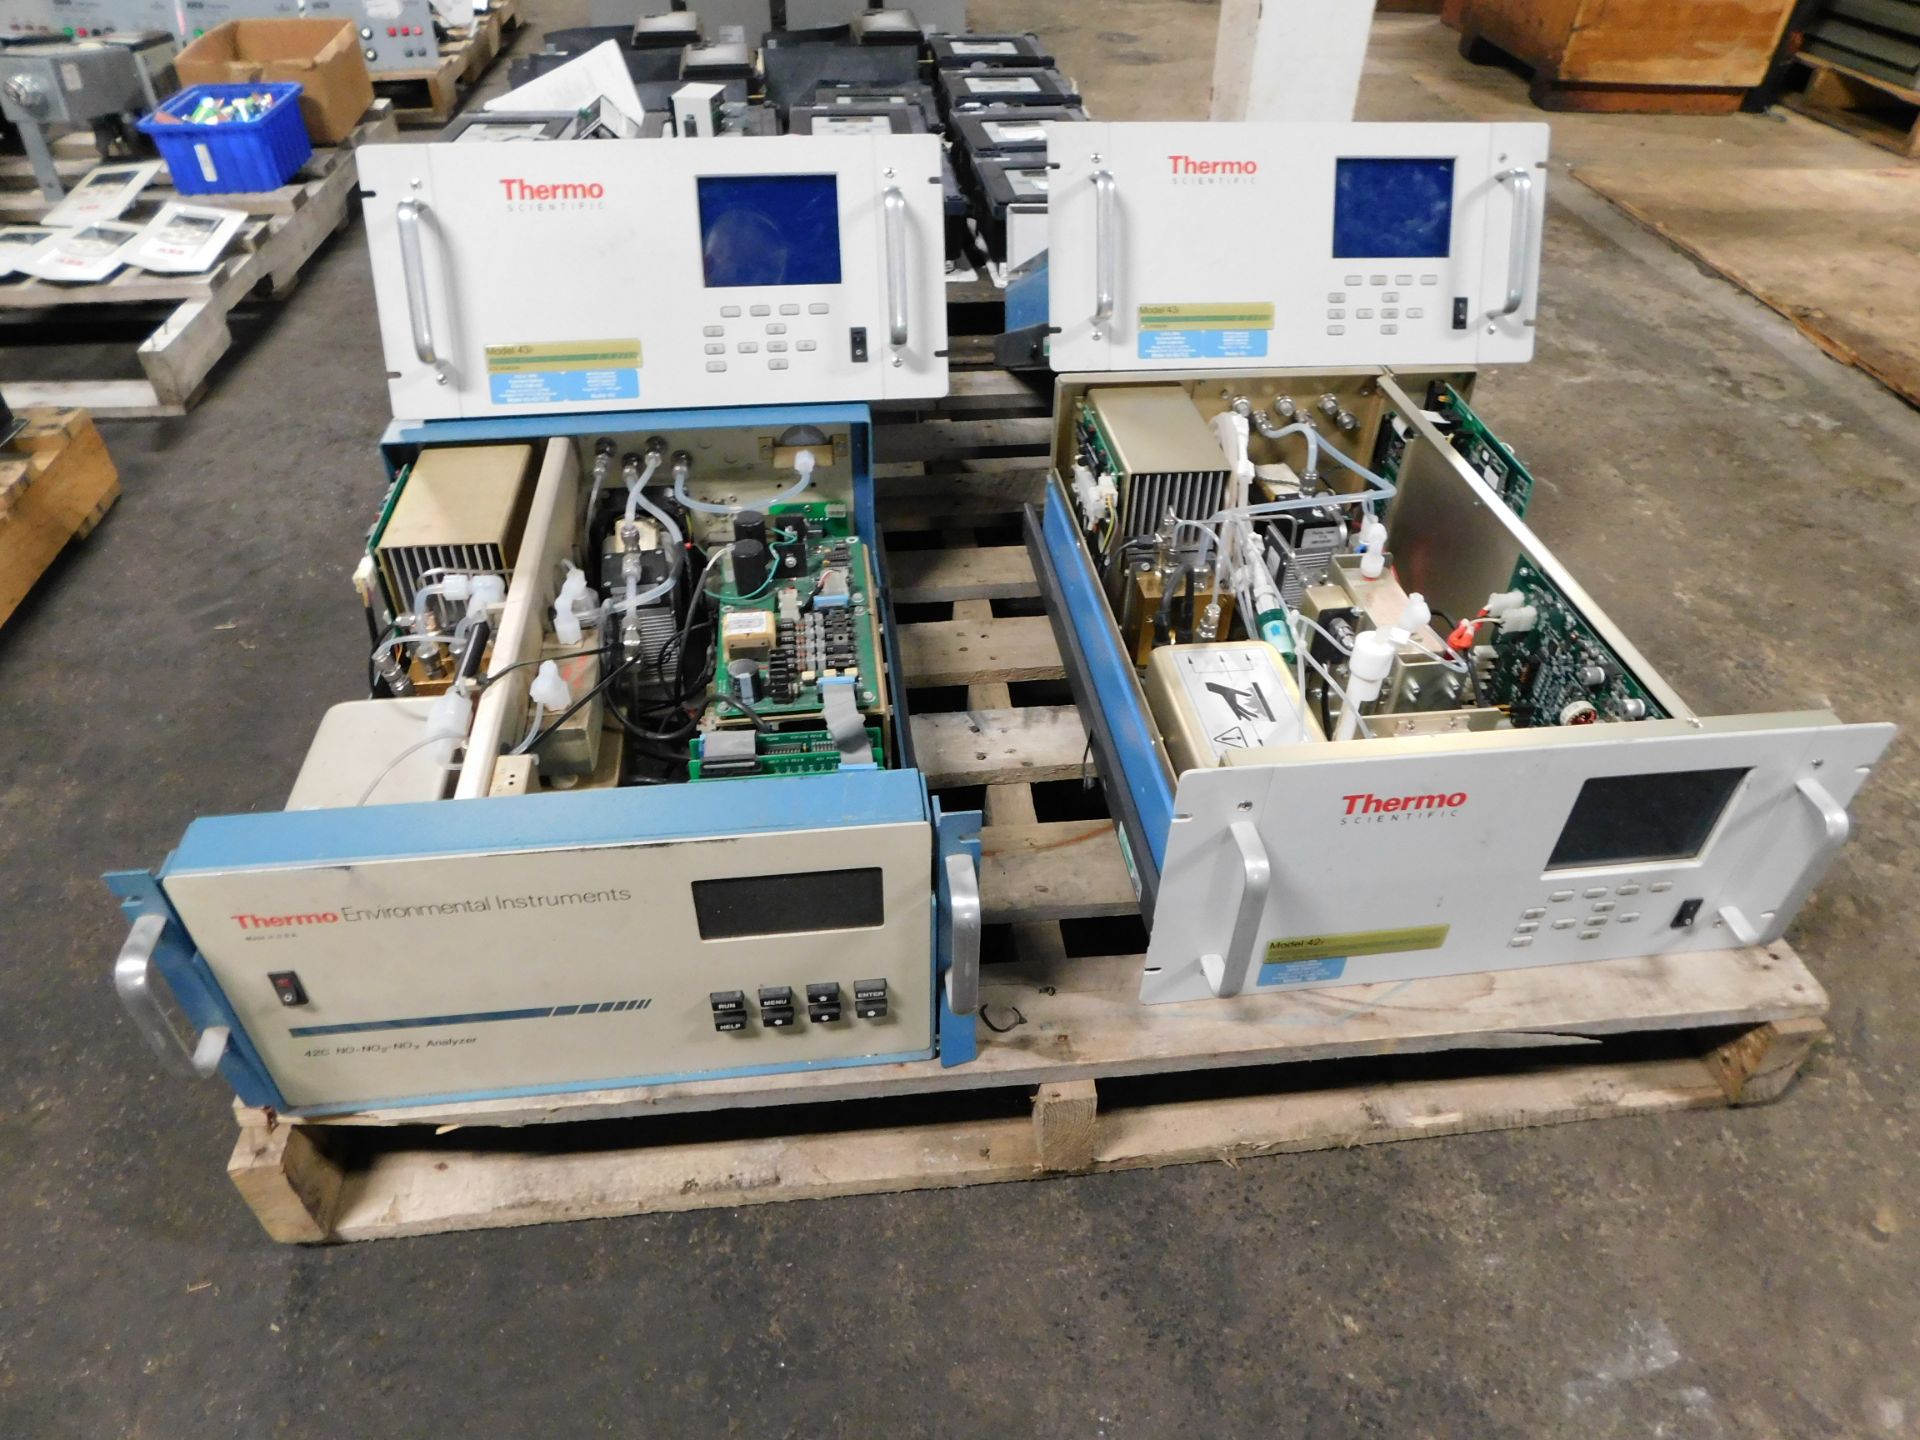 Pallet of Thermo CEMS Equipment - 42i, 42c, (2) 43i